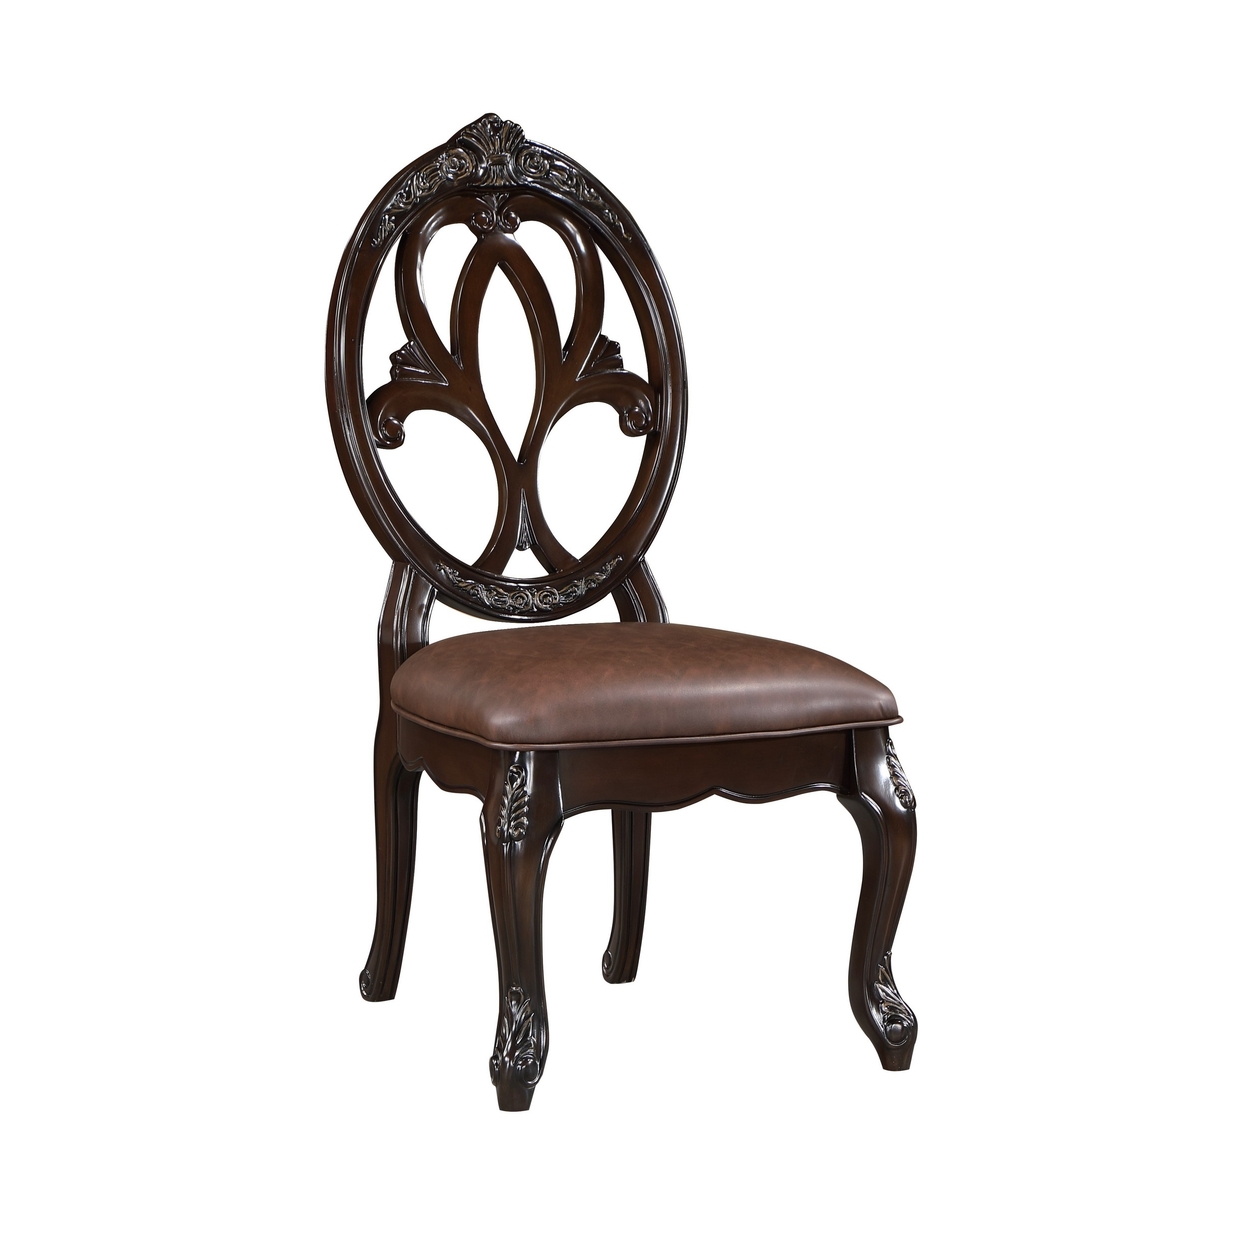 Cran 21 Inch Dining Side Chair, Carved Details, Faux Leather Seat, Brown - Saltoro Sherpi